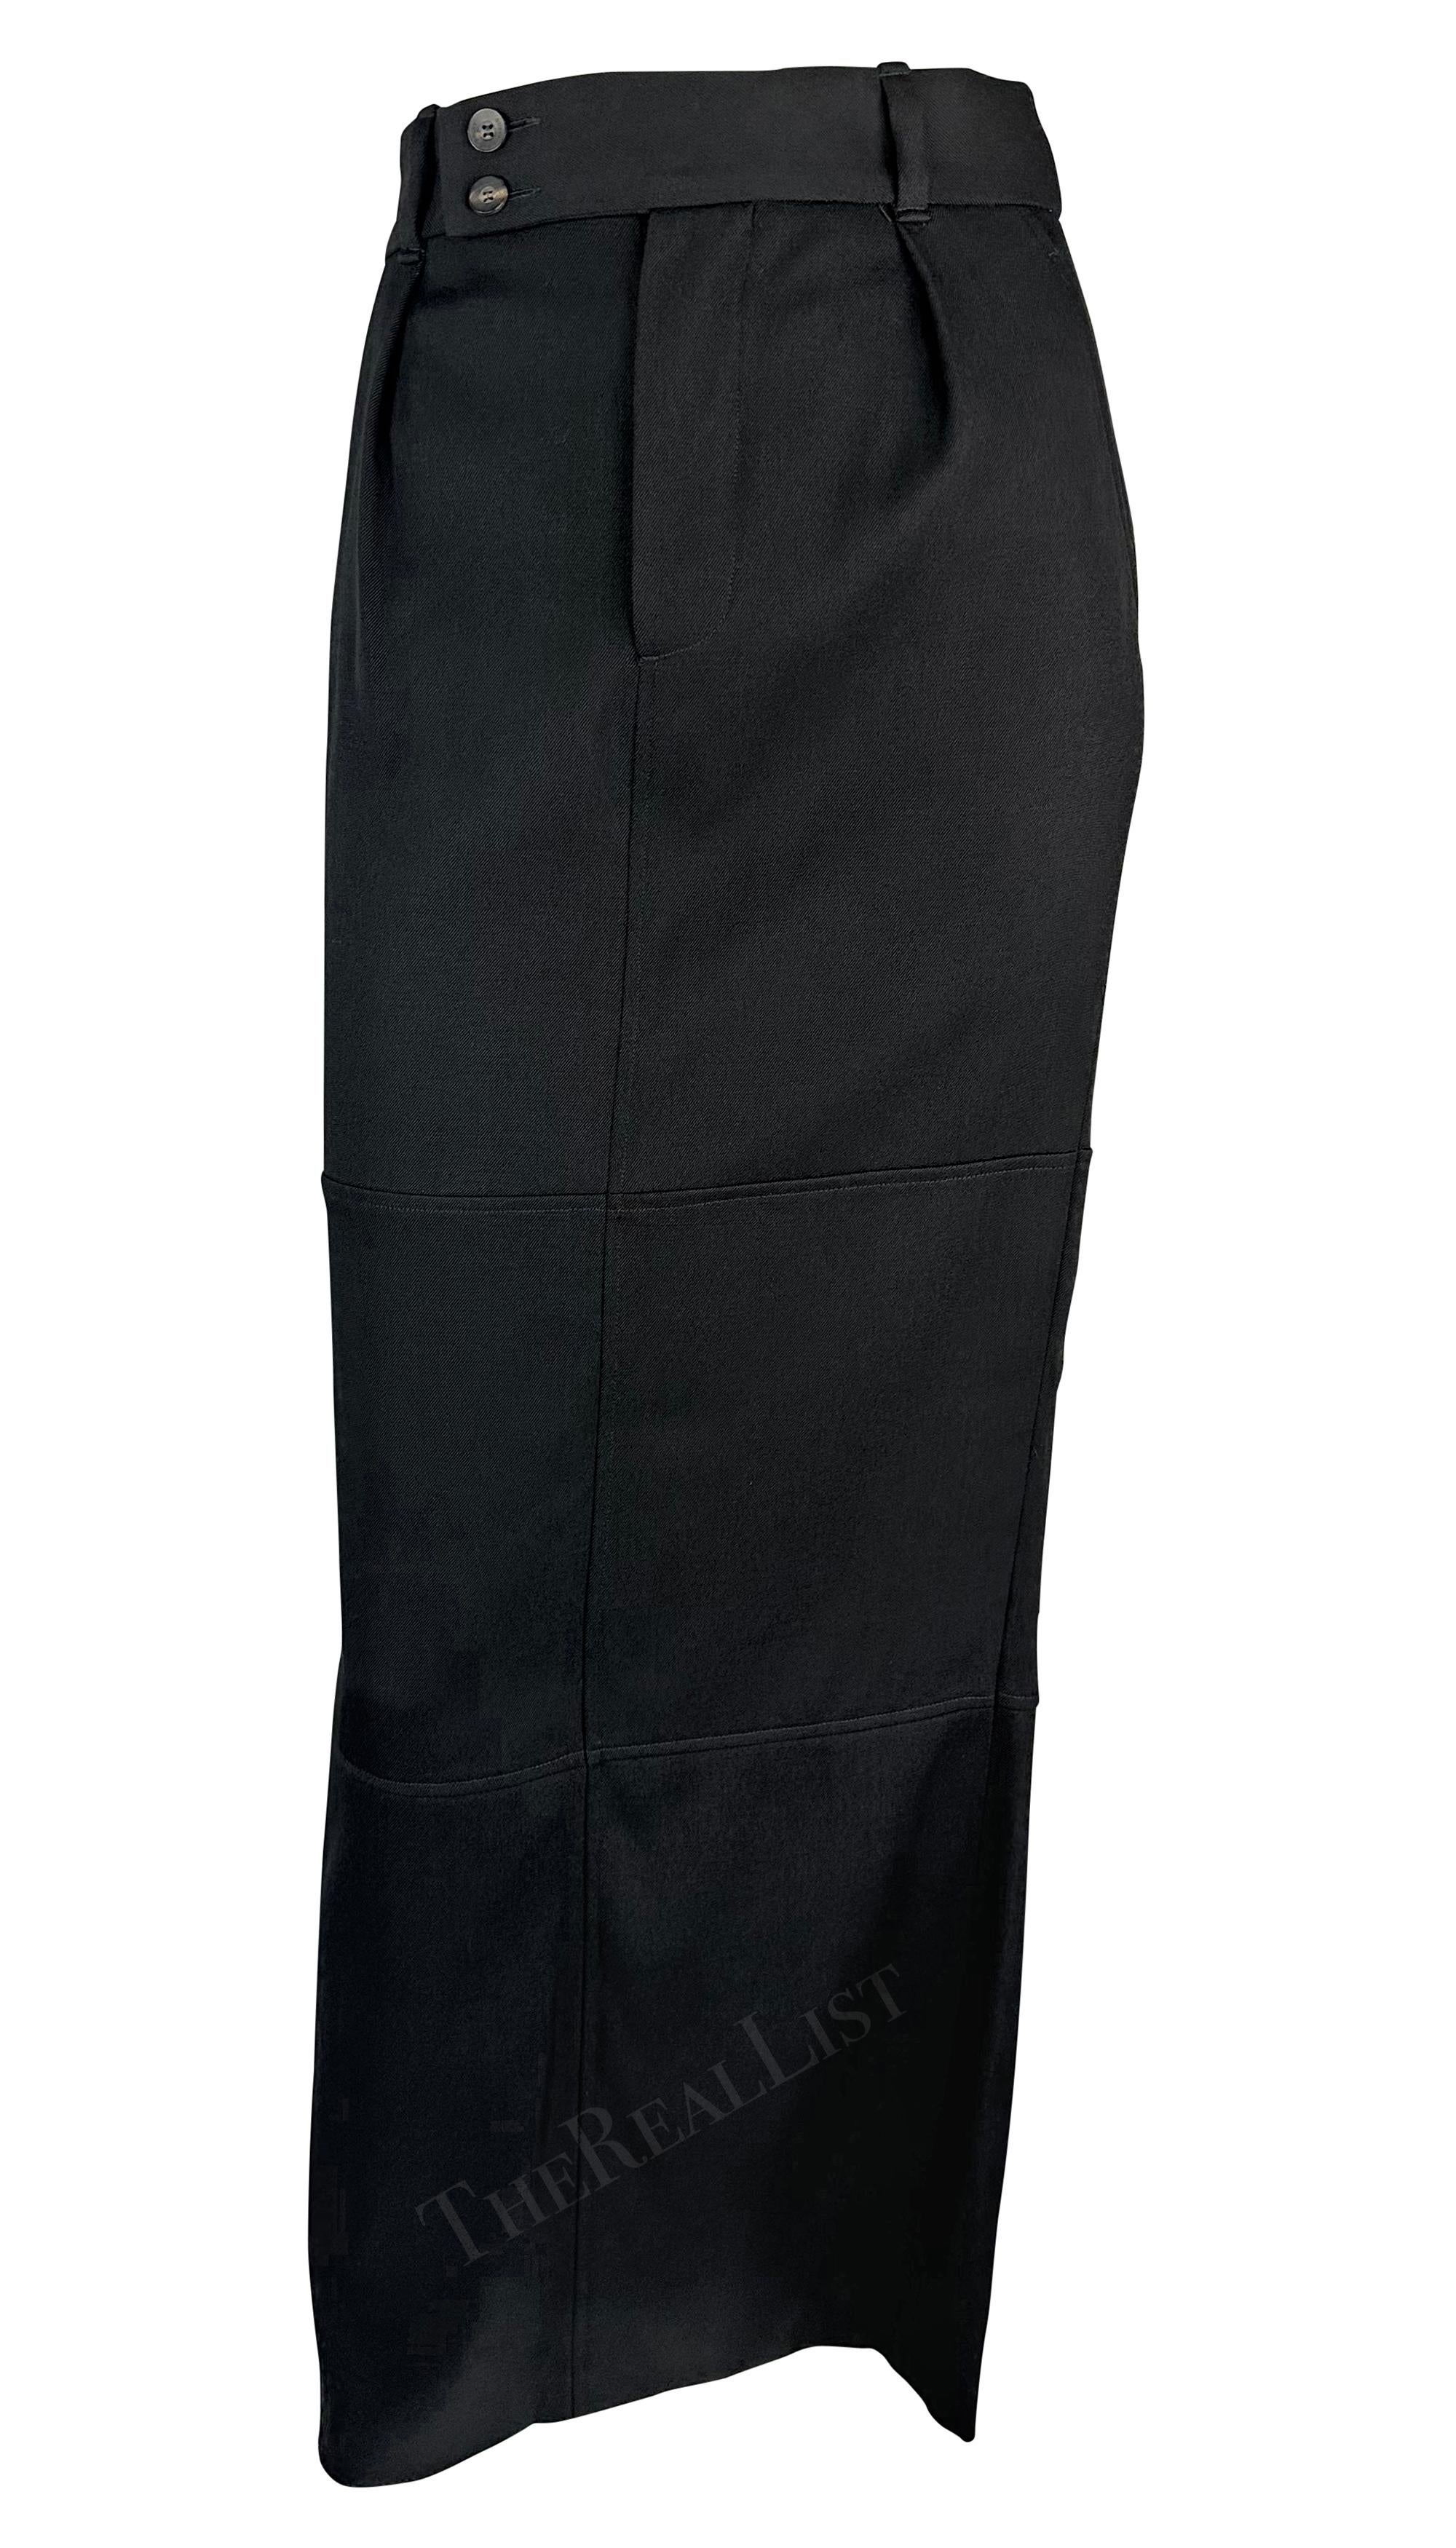 F/W 1998 Gucci by Tom Ford Runway Ad Black Buckle Wool Slit Maxi Skirt For Sale 4